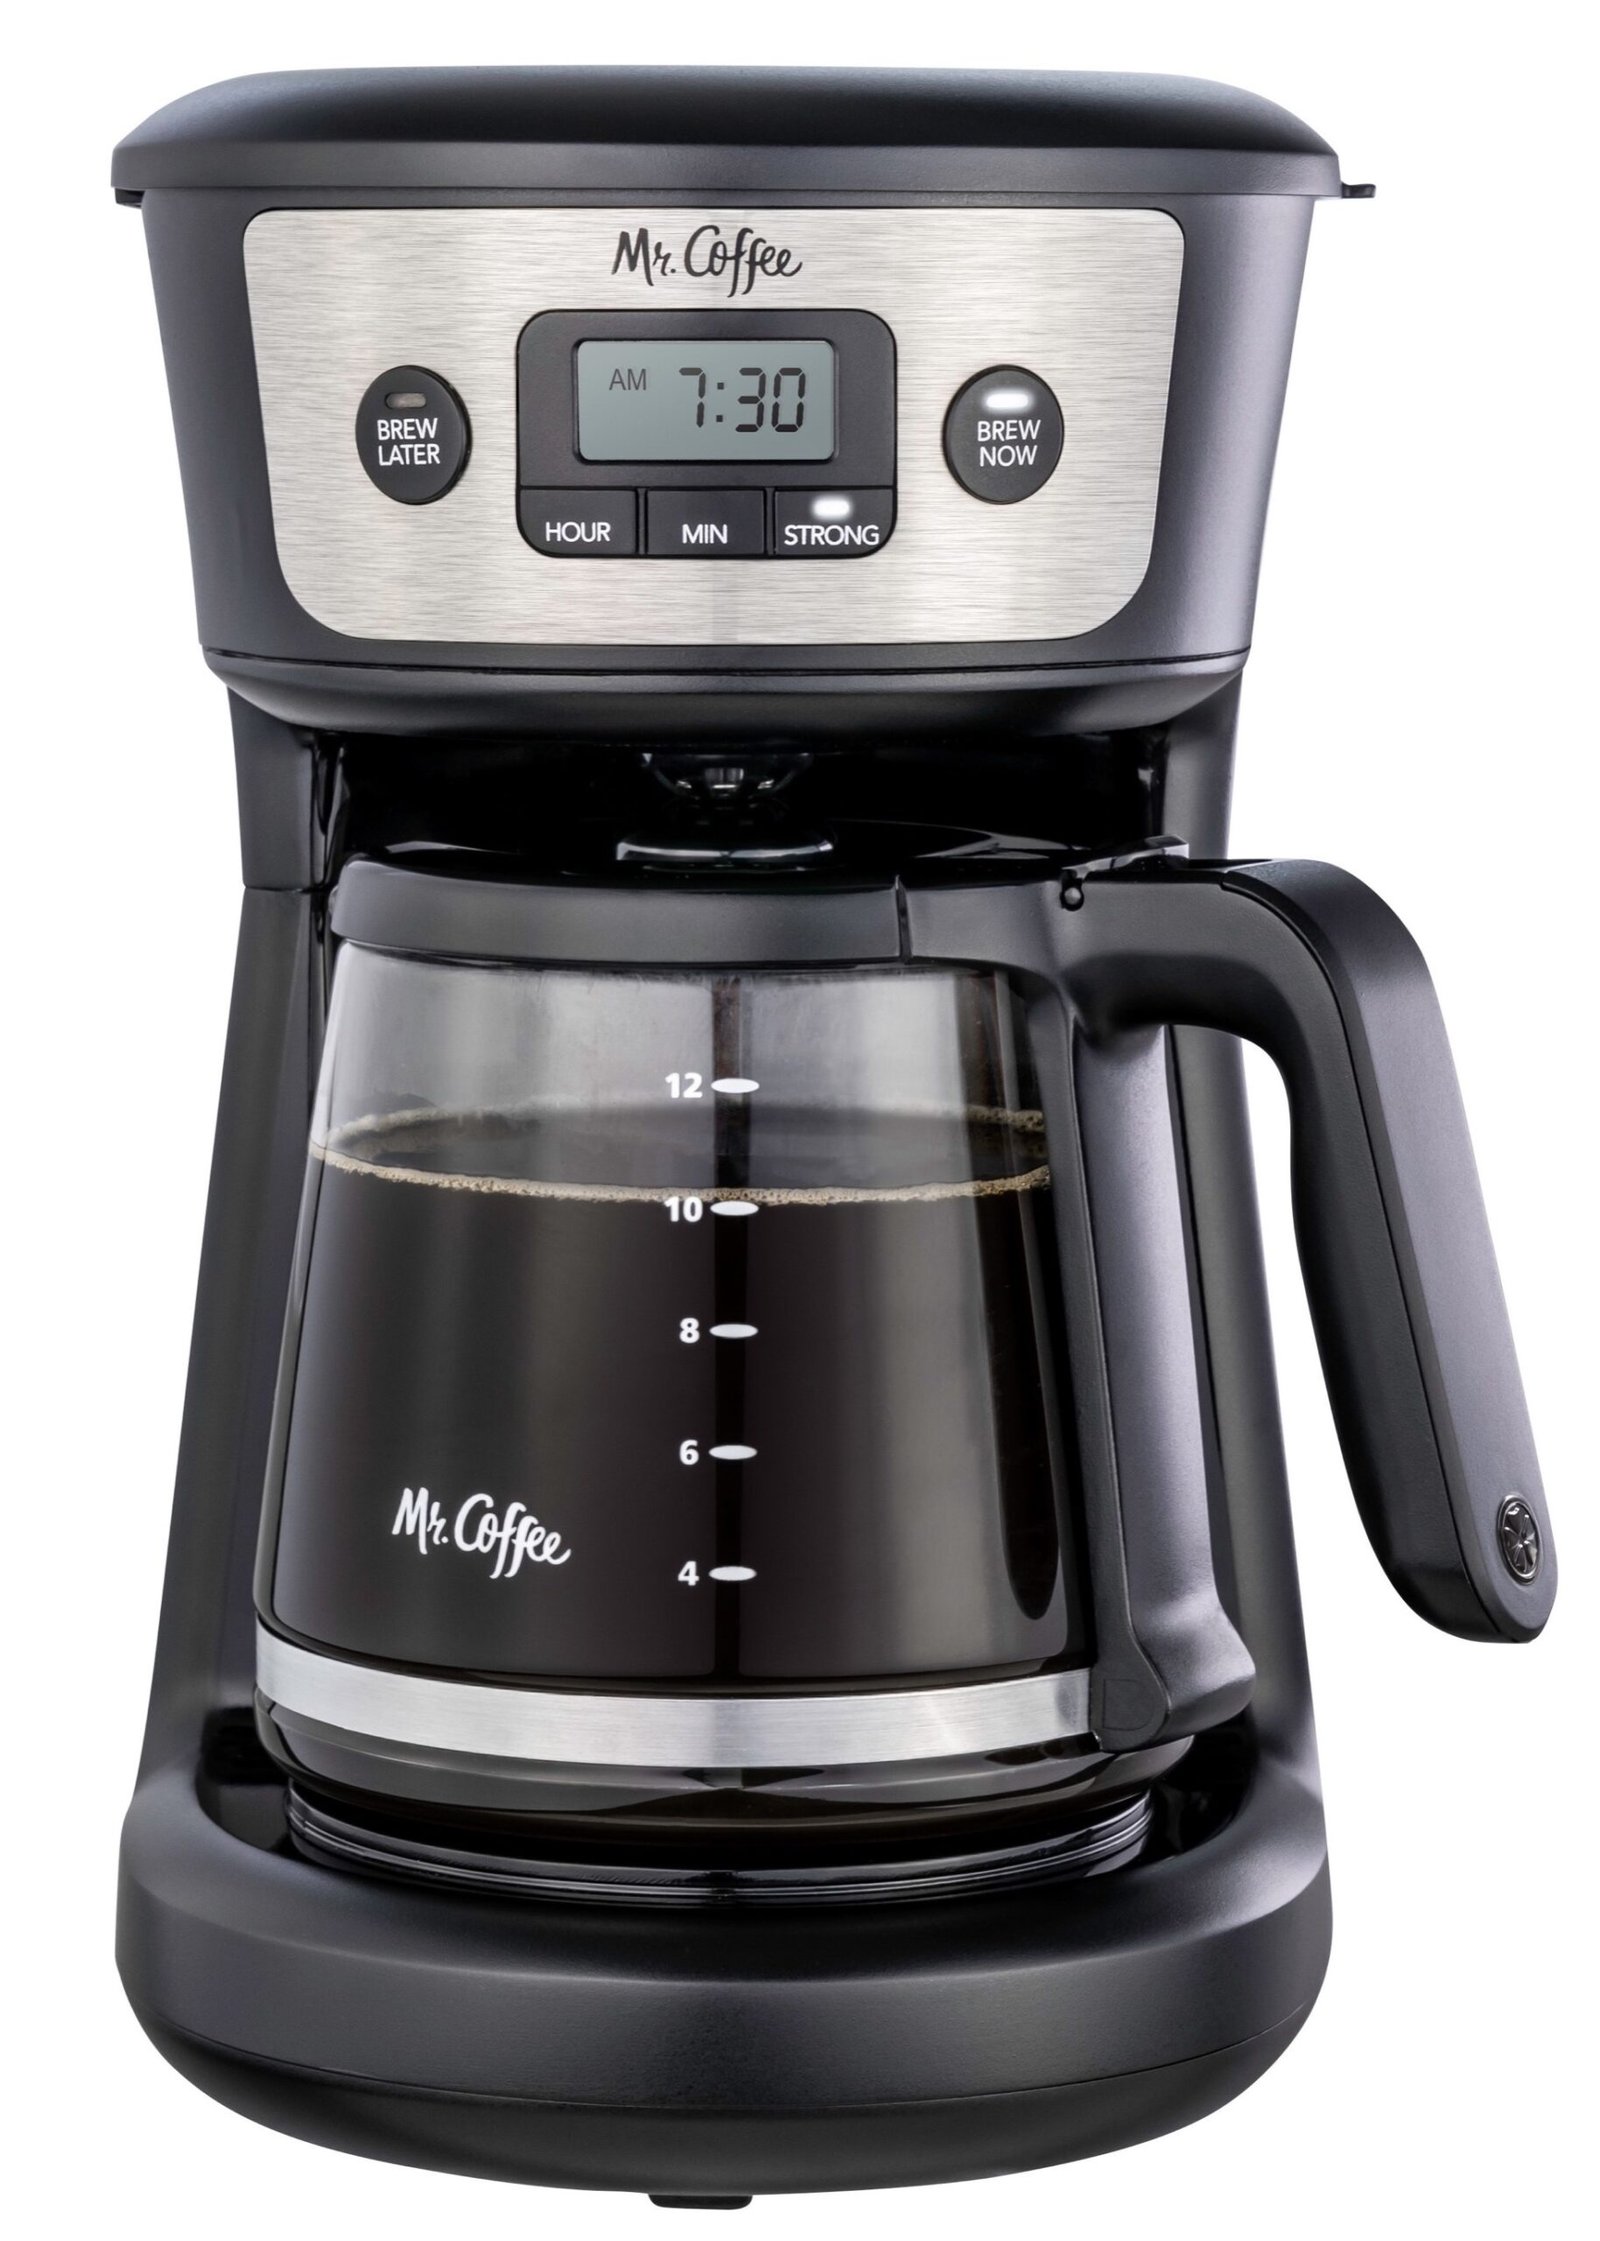 https://bestcoffeeprice.com/wp-content/uploads/2020/11/Mr.-Coffee-12-Cup-Programmable-Coffeemaker-Strong-Brew-Selector-Stainless-Steel-scaled.jpeg